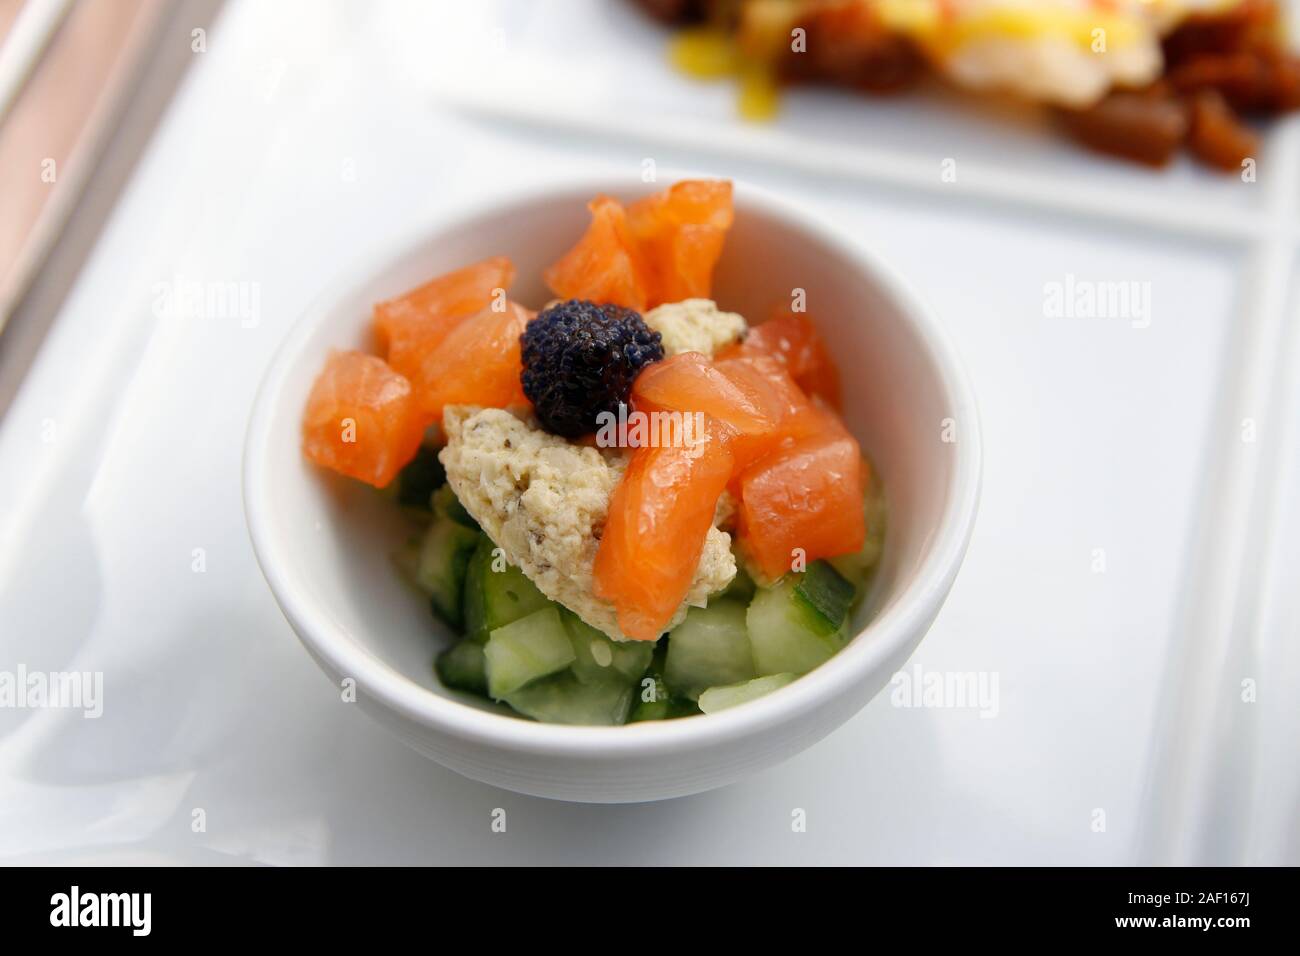 Focus on the diced smoke salmon with lumpfish roe, cucumber and artichoke tartare as the starter for dinner in Paris Stock Photo